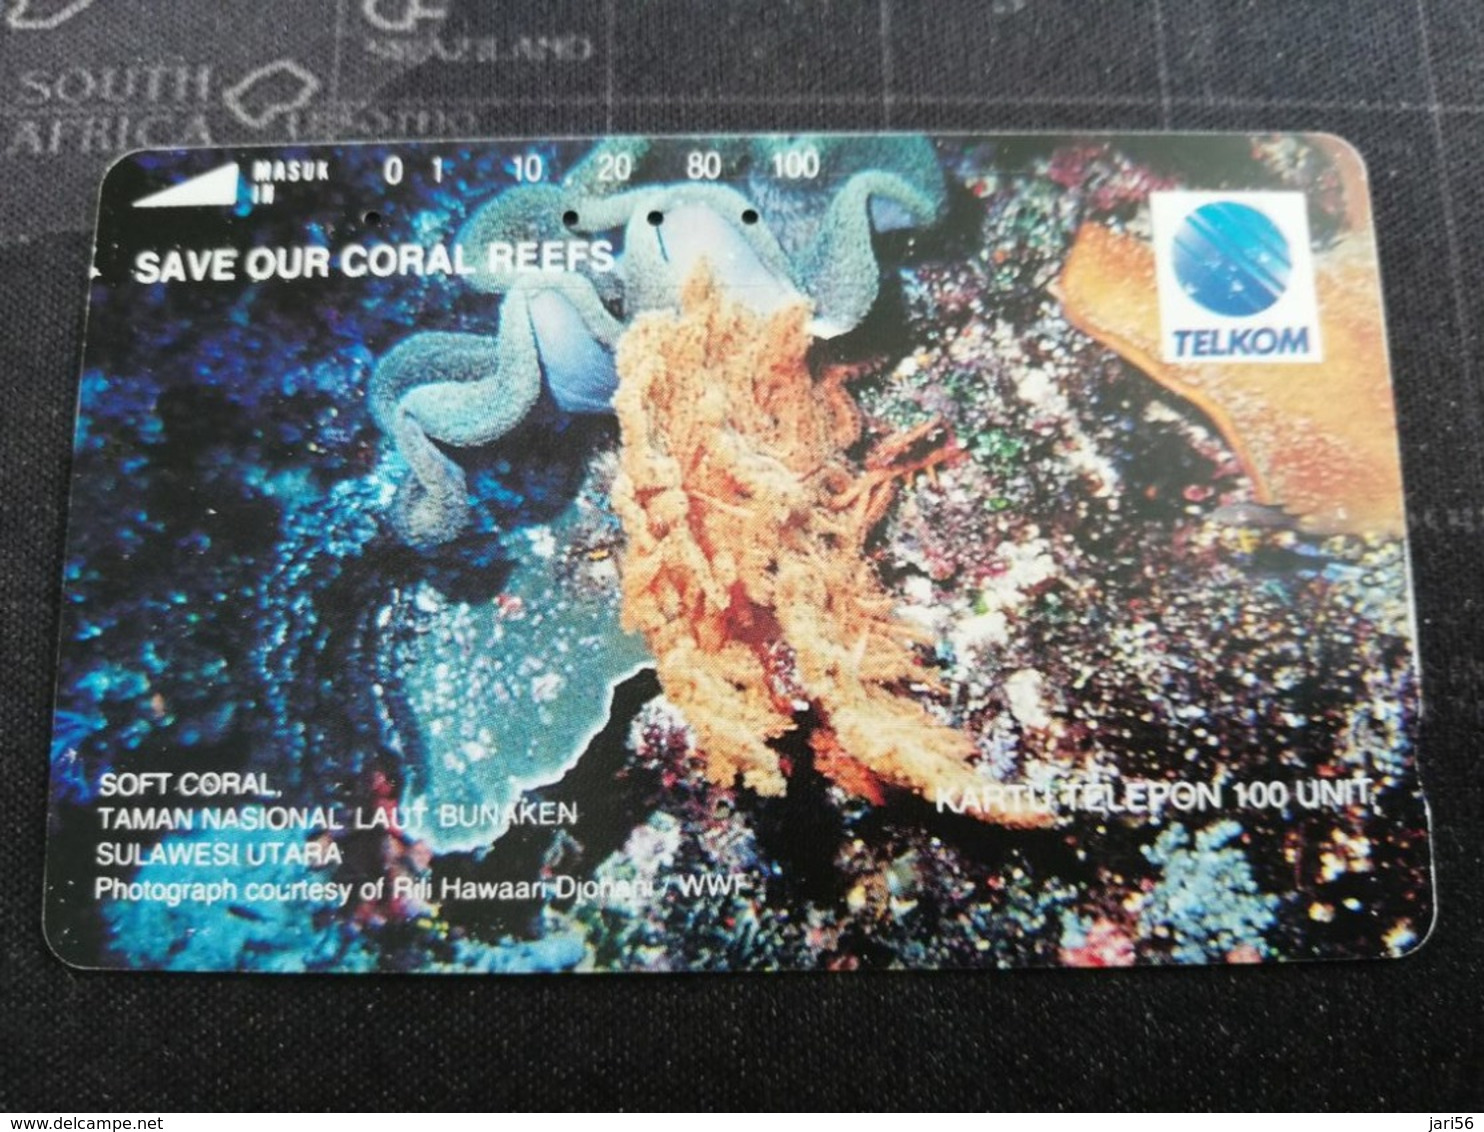 INDONESIA MAGNETIC/TAMURA  100 UNITS  SOFT CORAL / CORAL REEFS         Fine Used Card   **3031 ** - Indonesië